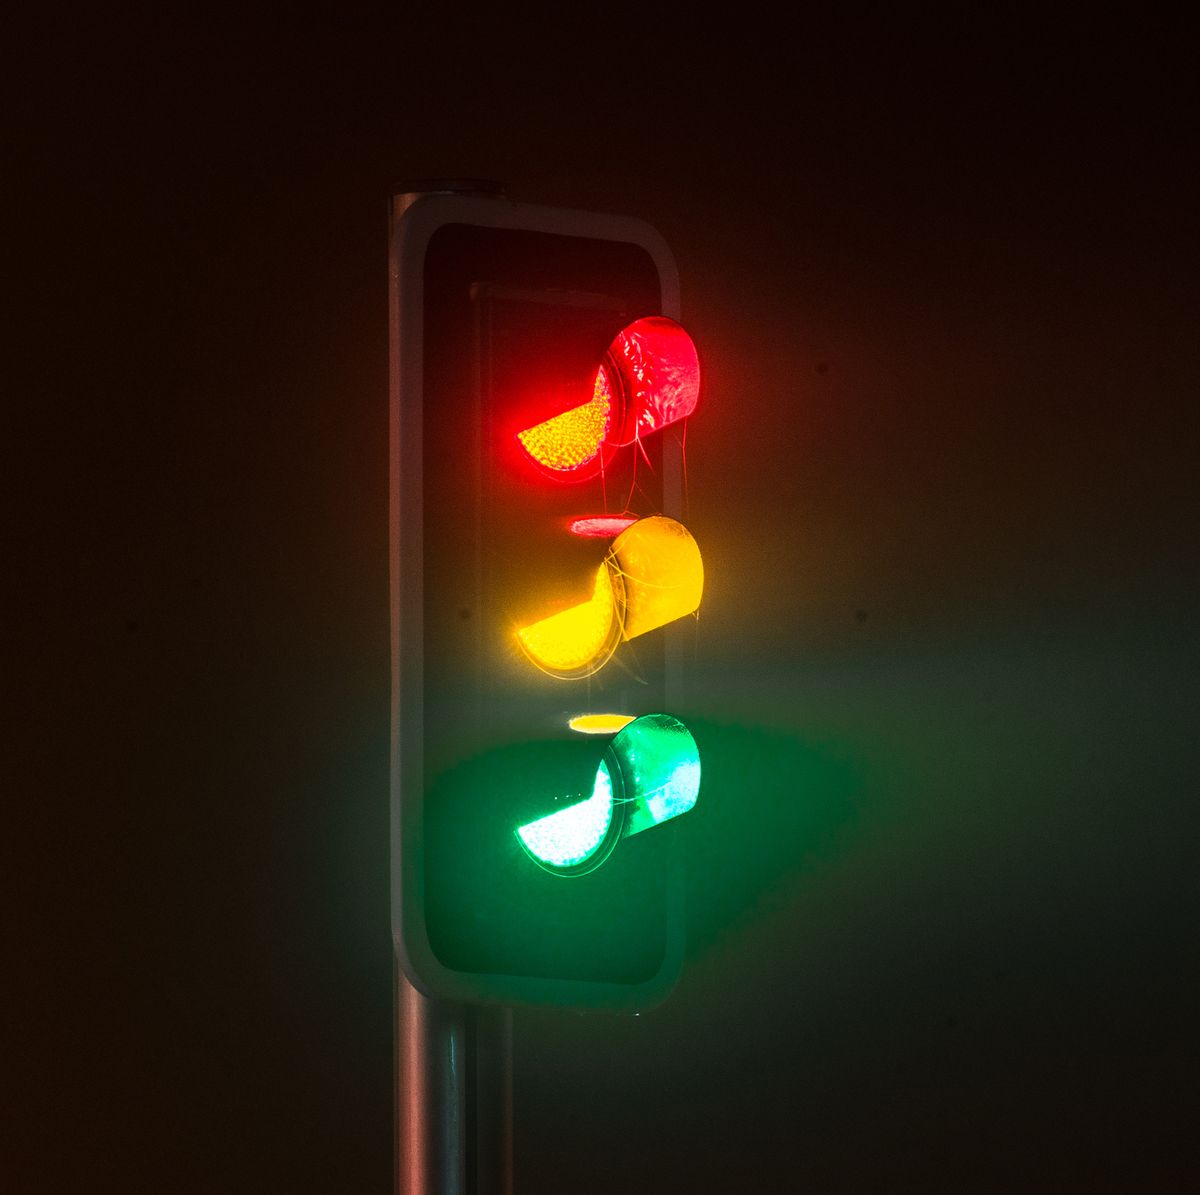 How Traffic Lights Work - Everything You Need to Know About Traffic Lights